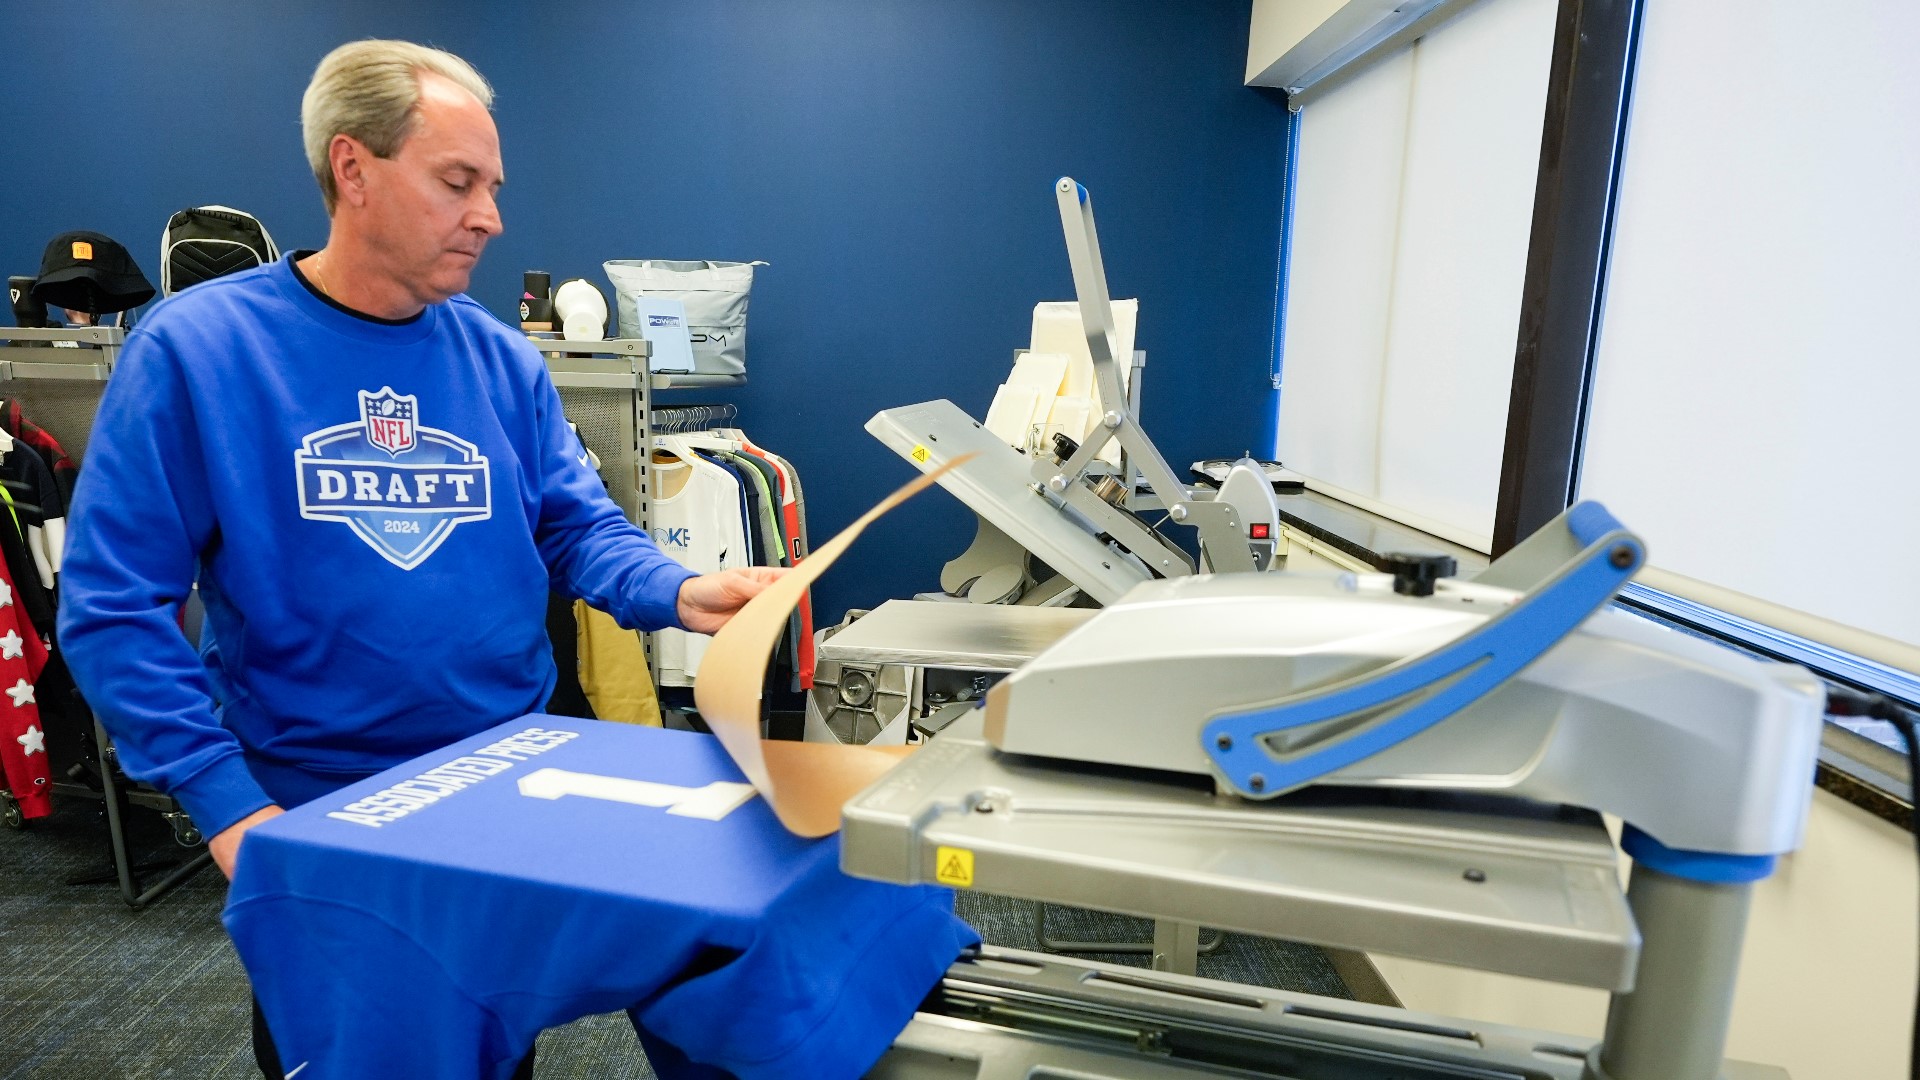 Brent Kisha, STAHLS' vice president of strategic sales, demonstrates using a Hotronix Fusion IQ heat press to put a name on shirt in St. Clair Shores, Mich.